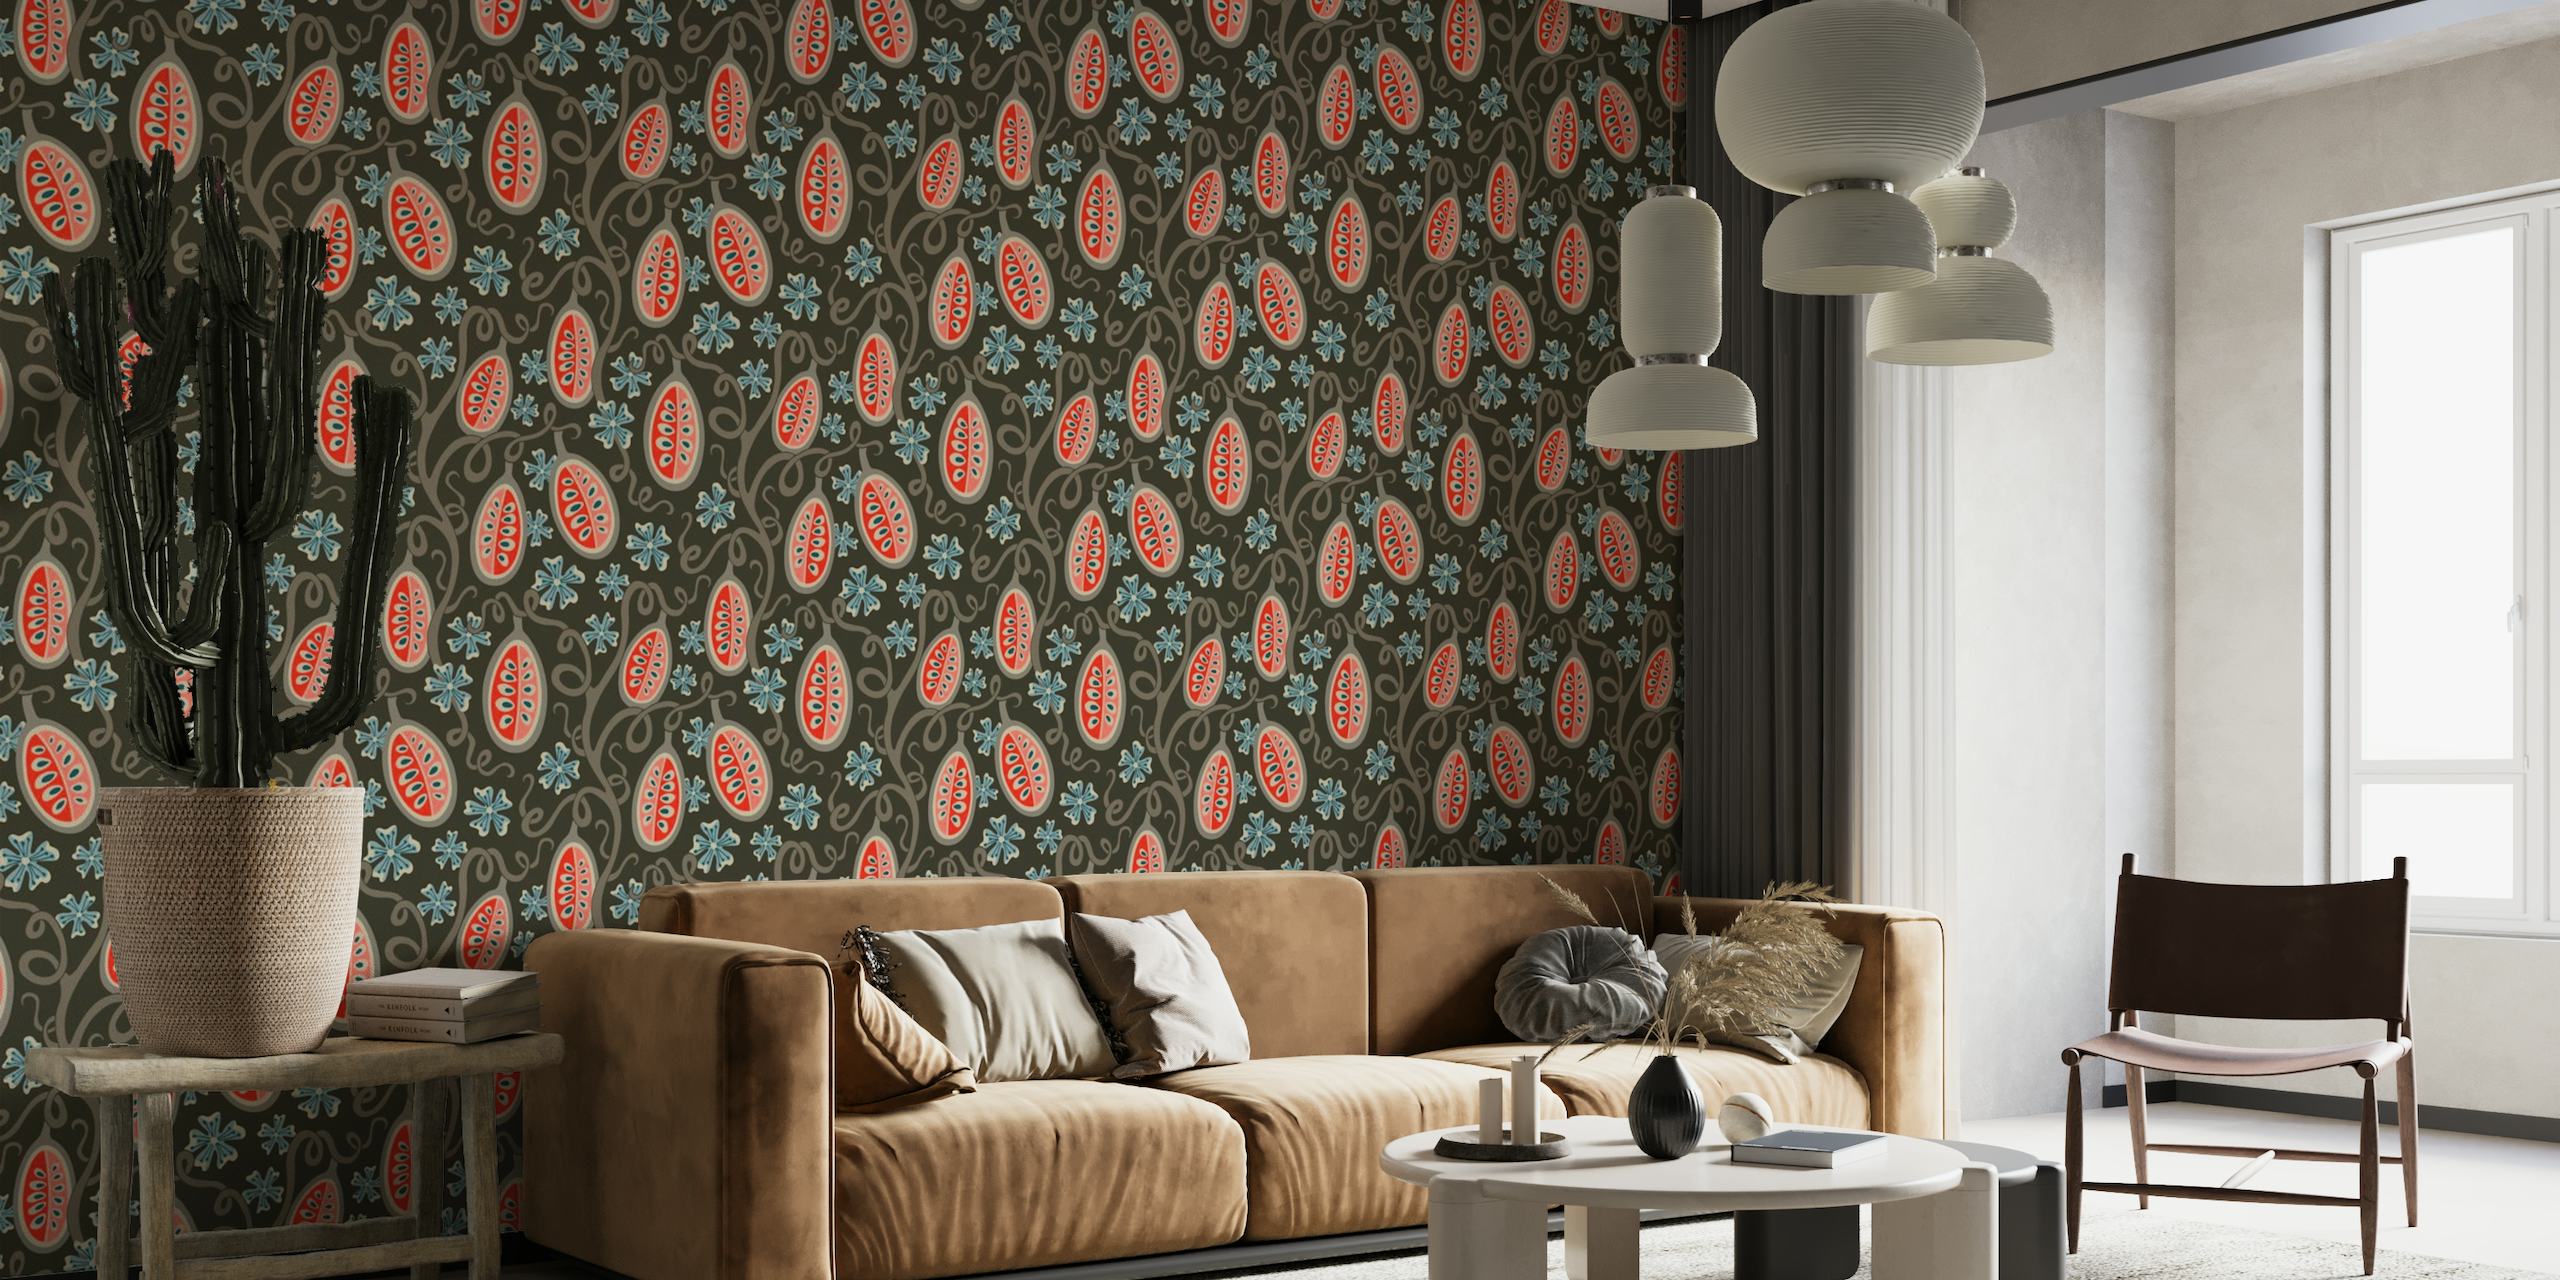 AMBROSIA Fantasy Mod Floral Fruit wall mural with coral, brown, and blue accents on a dark background